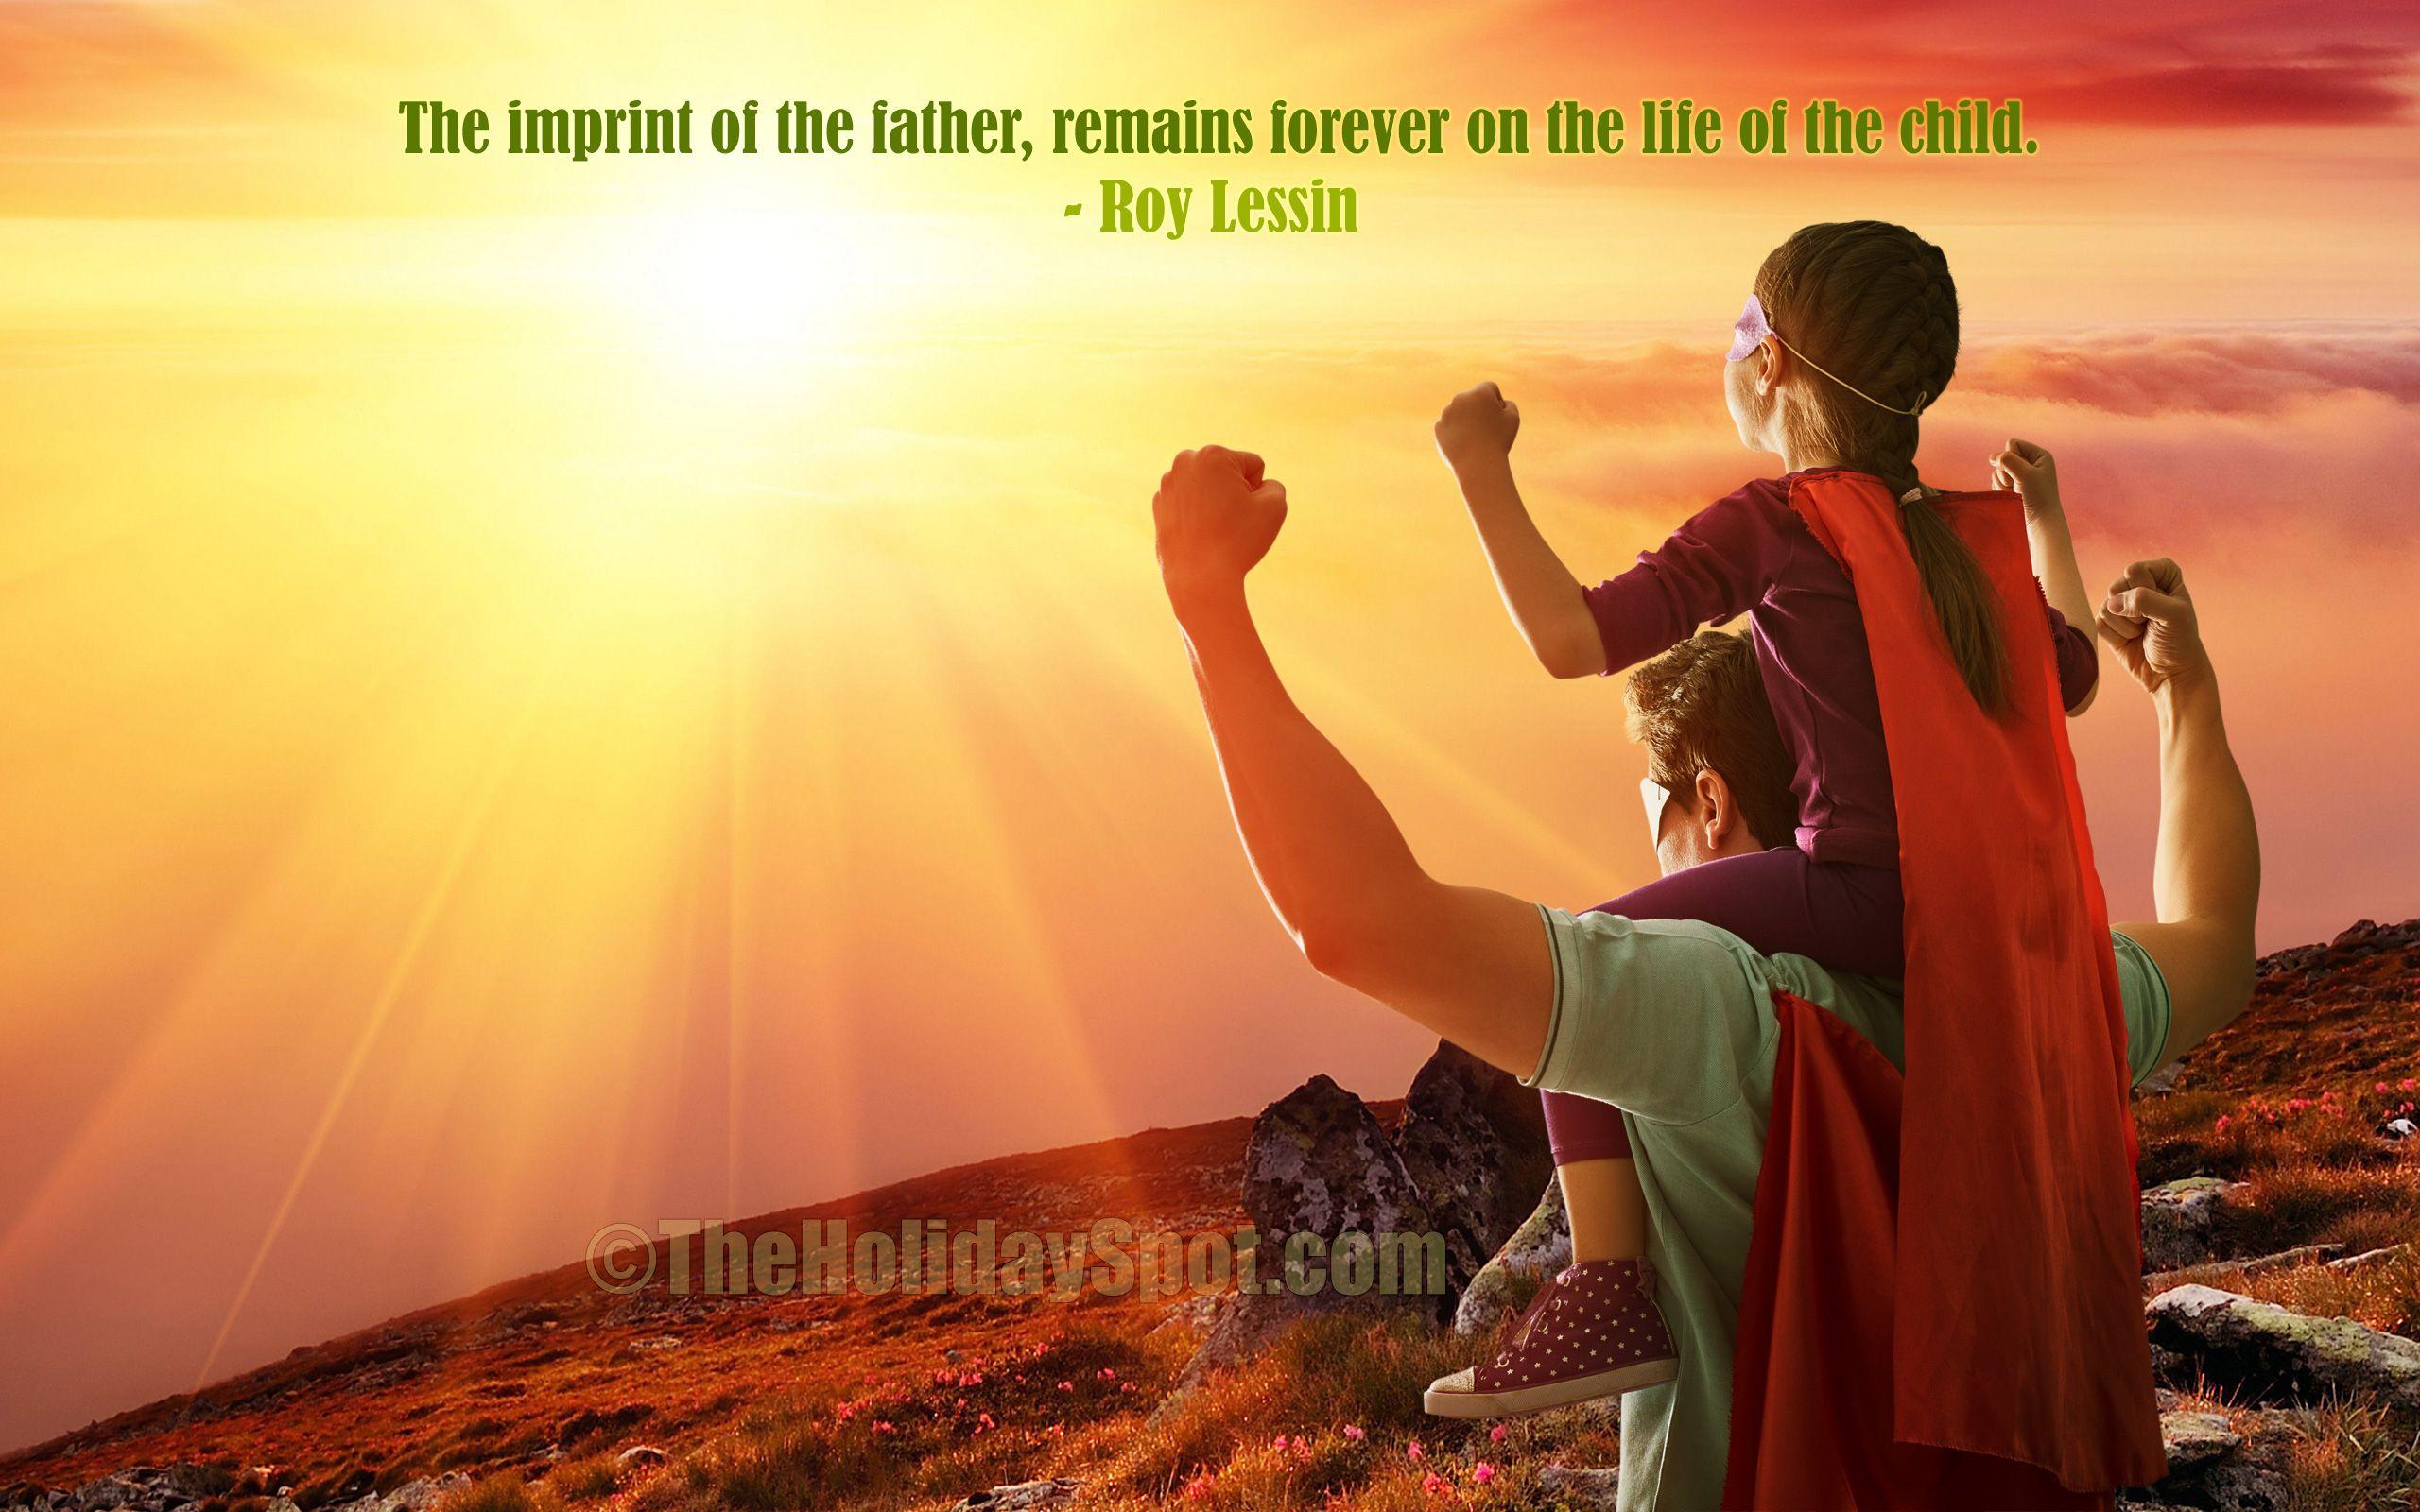 Fathers Day Wallpaper. Fathers Day Image 2022 HD. Happy Fathers Day Image